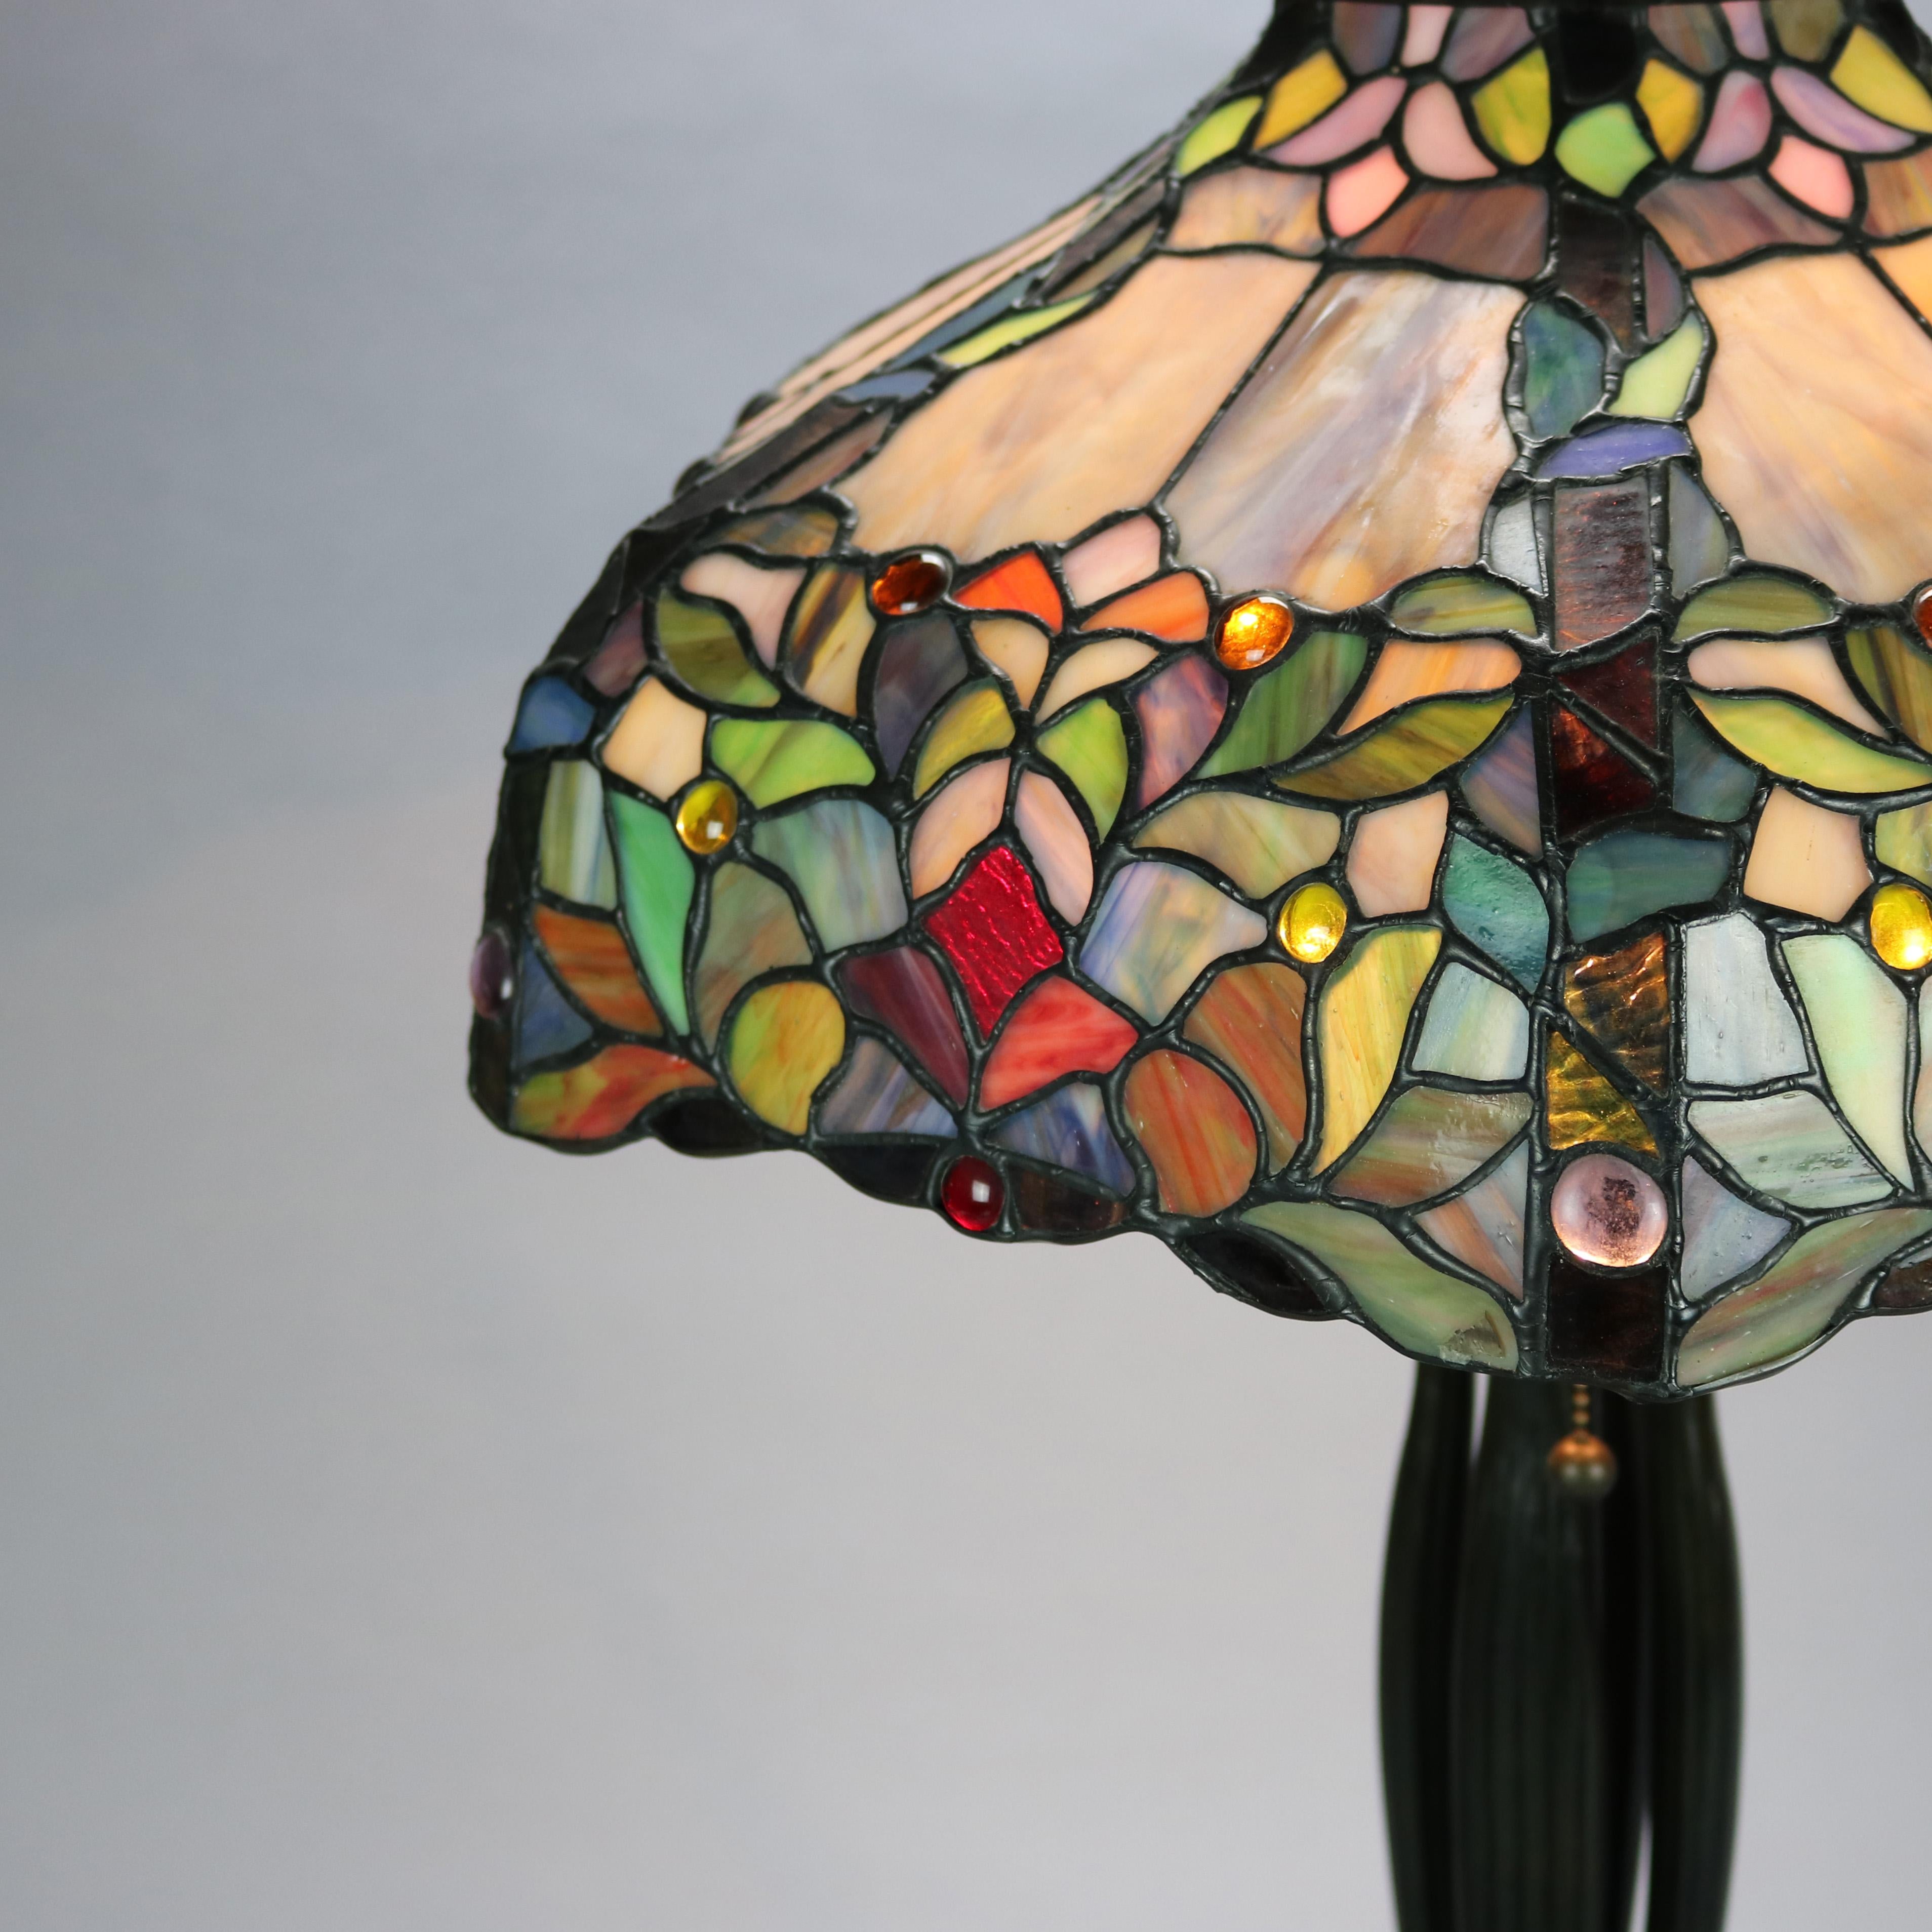 An vintage table lamp by Dale Tiffany offers an Art Nouveau design with stylized parasol form shade in mosaic leaded stained and jeweled glass foliate design over bronzed cast two socket base having column with stylized paw feet, 20th